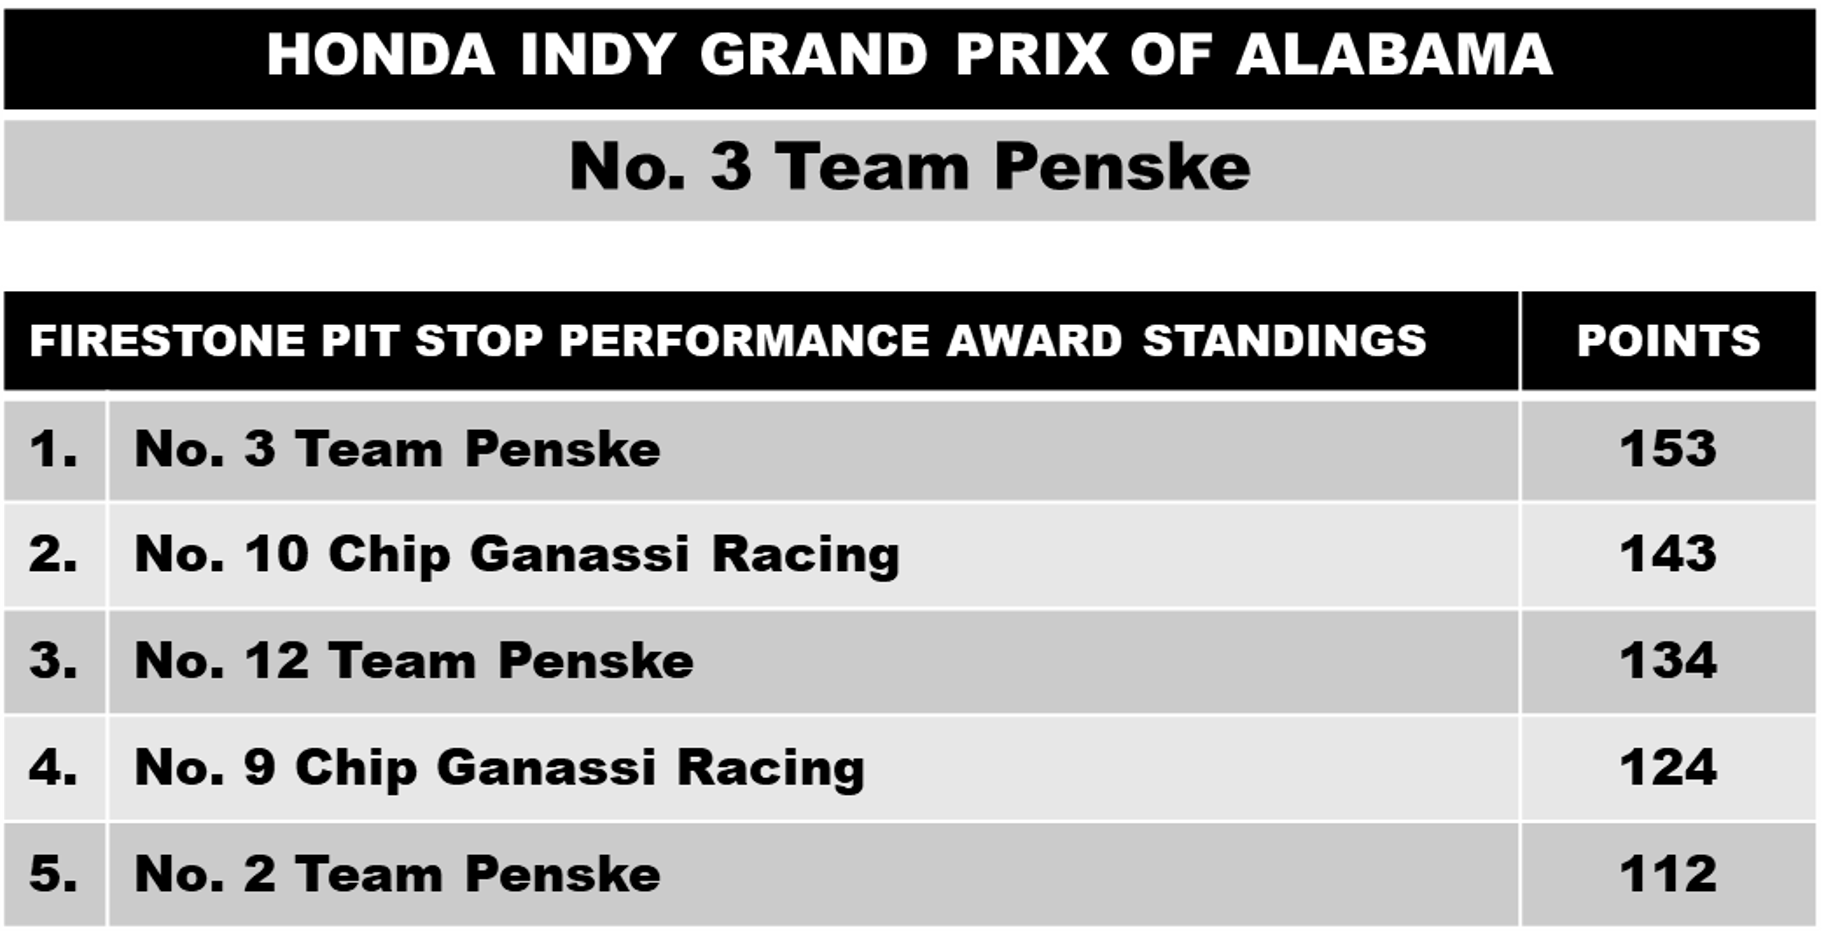 Table showing Honda Indy Grand Prix of Alabama point totals.